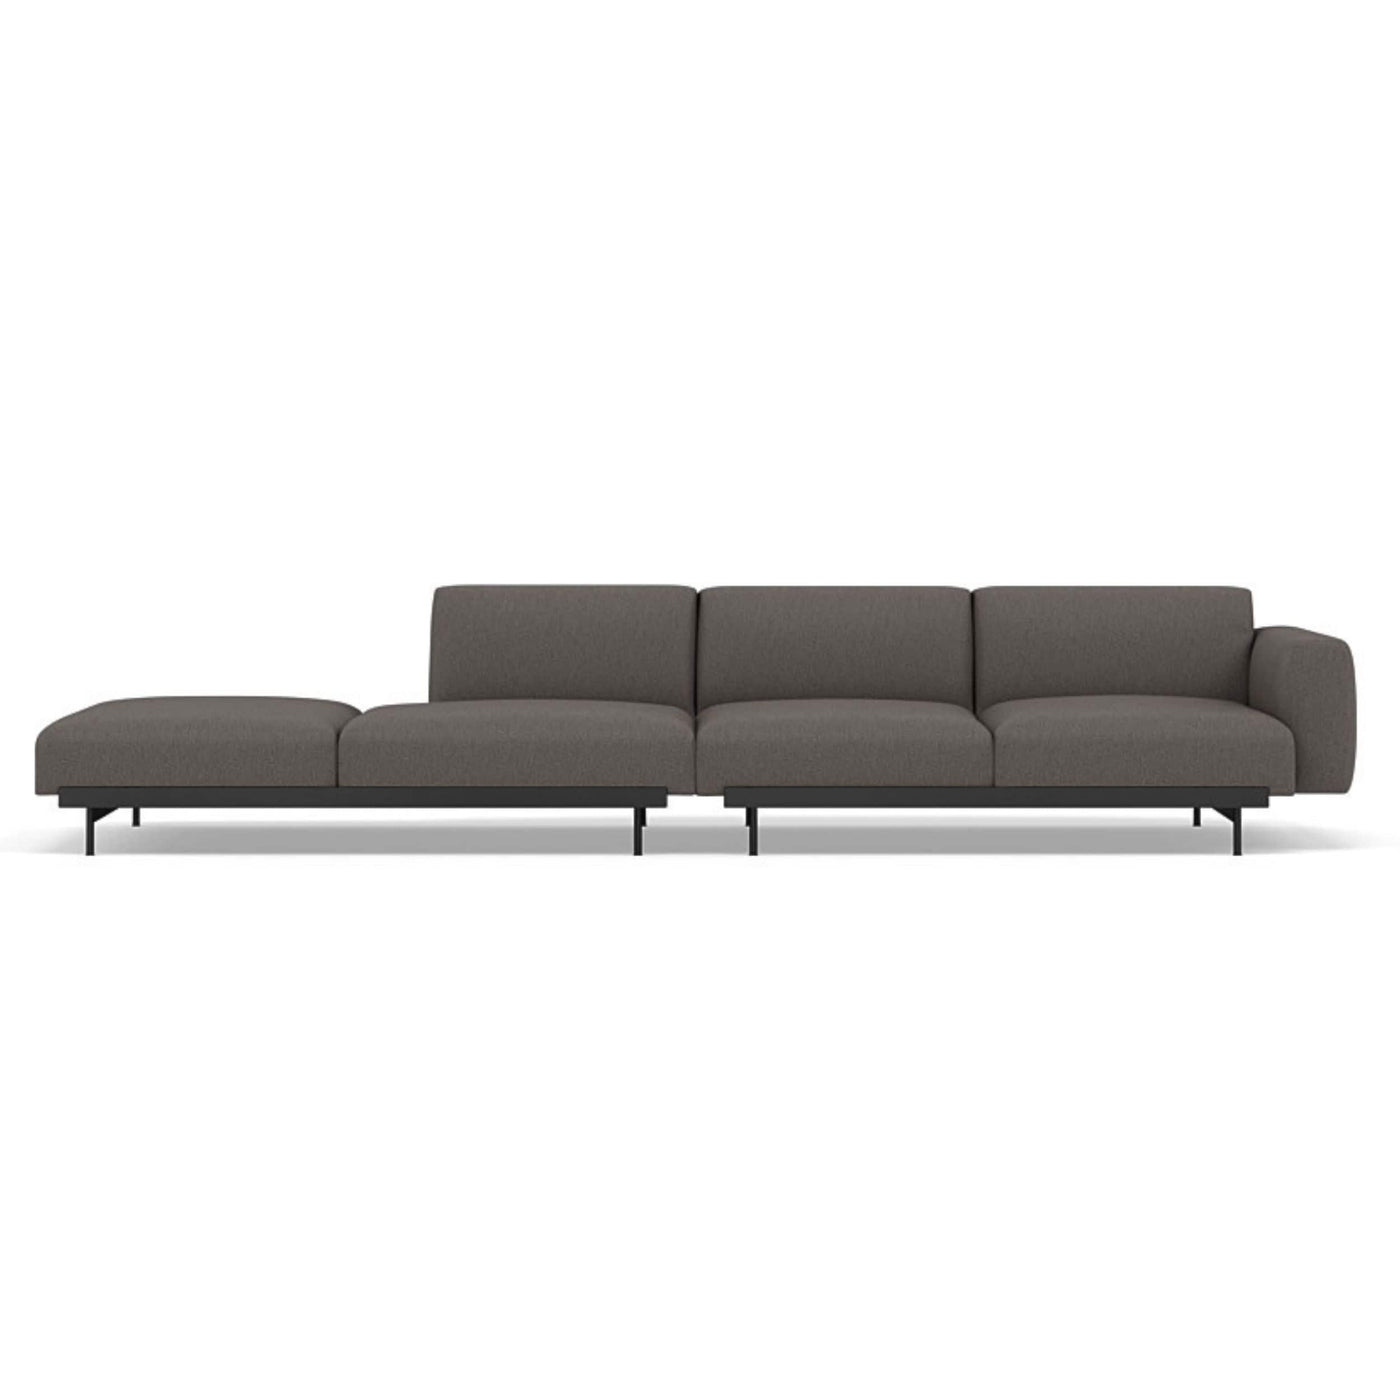 Muuto In Situ Modular 4 Seater Sofa configuration 3. Made to order from someday designs. #colour_clay-9